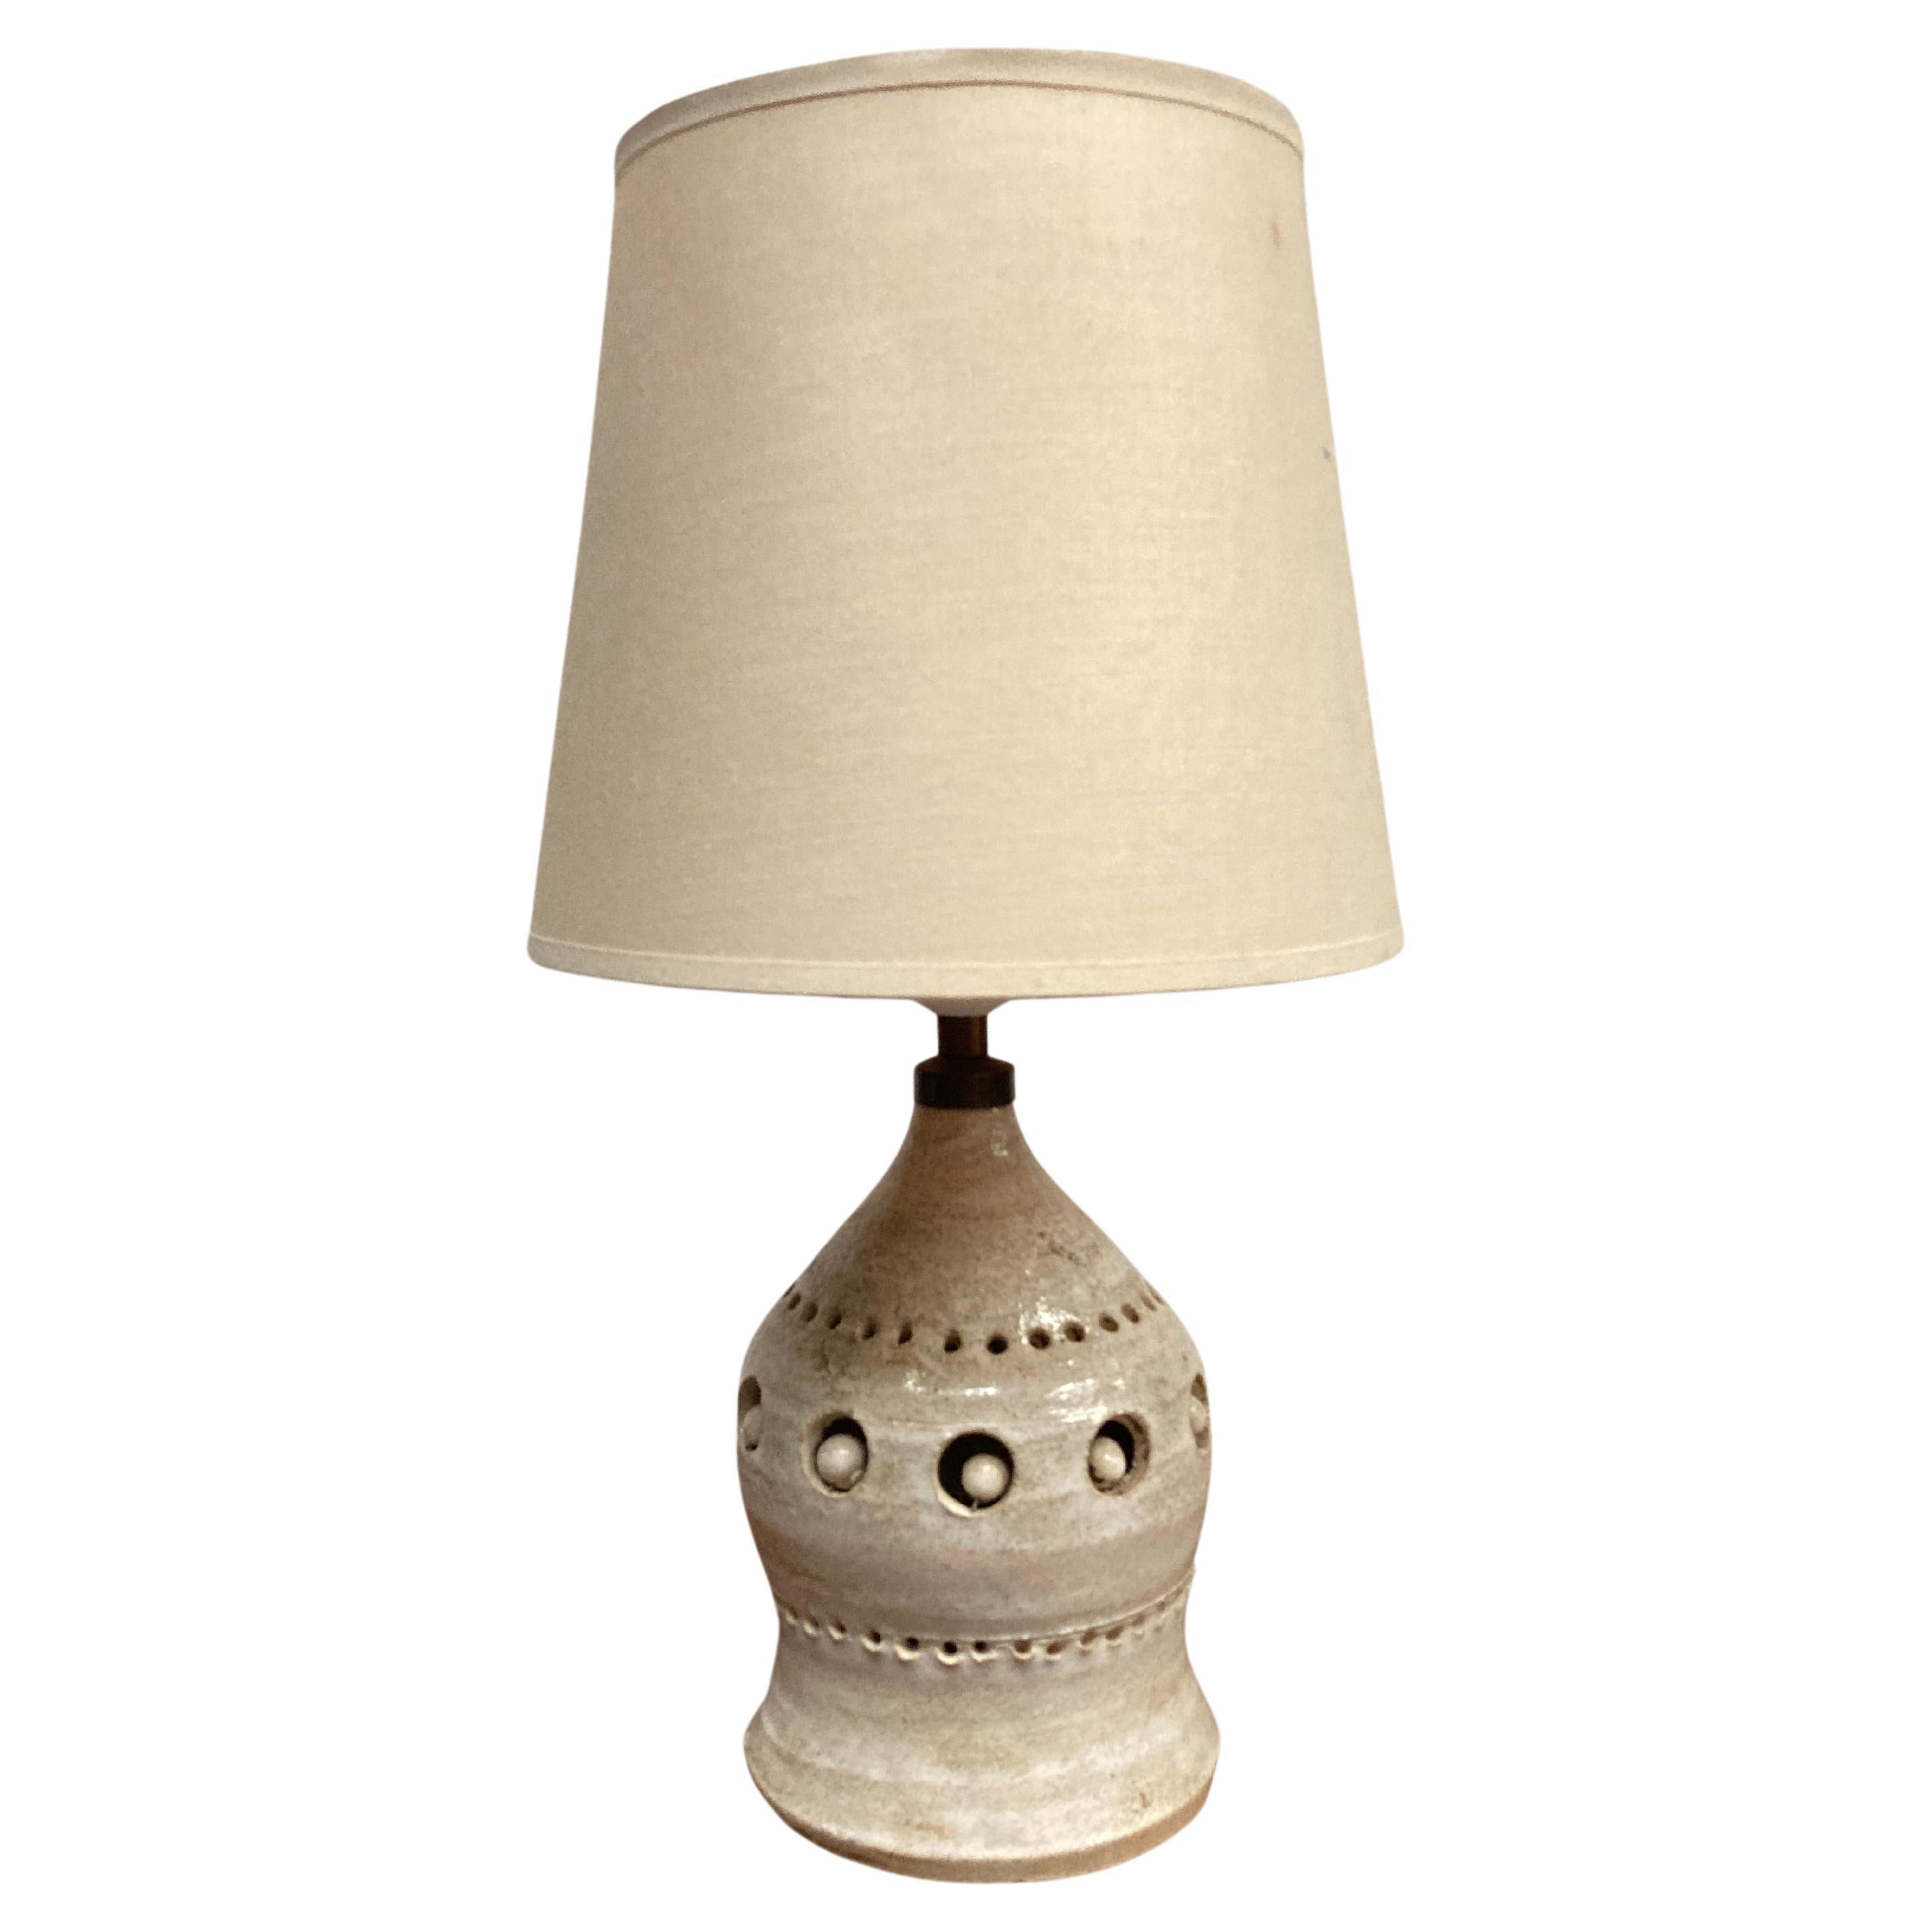 Small ceramic table lamp by Georges Pelletier